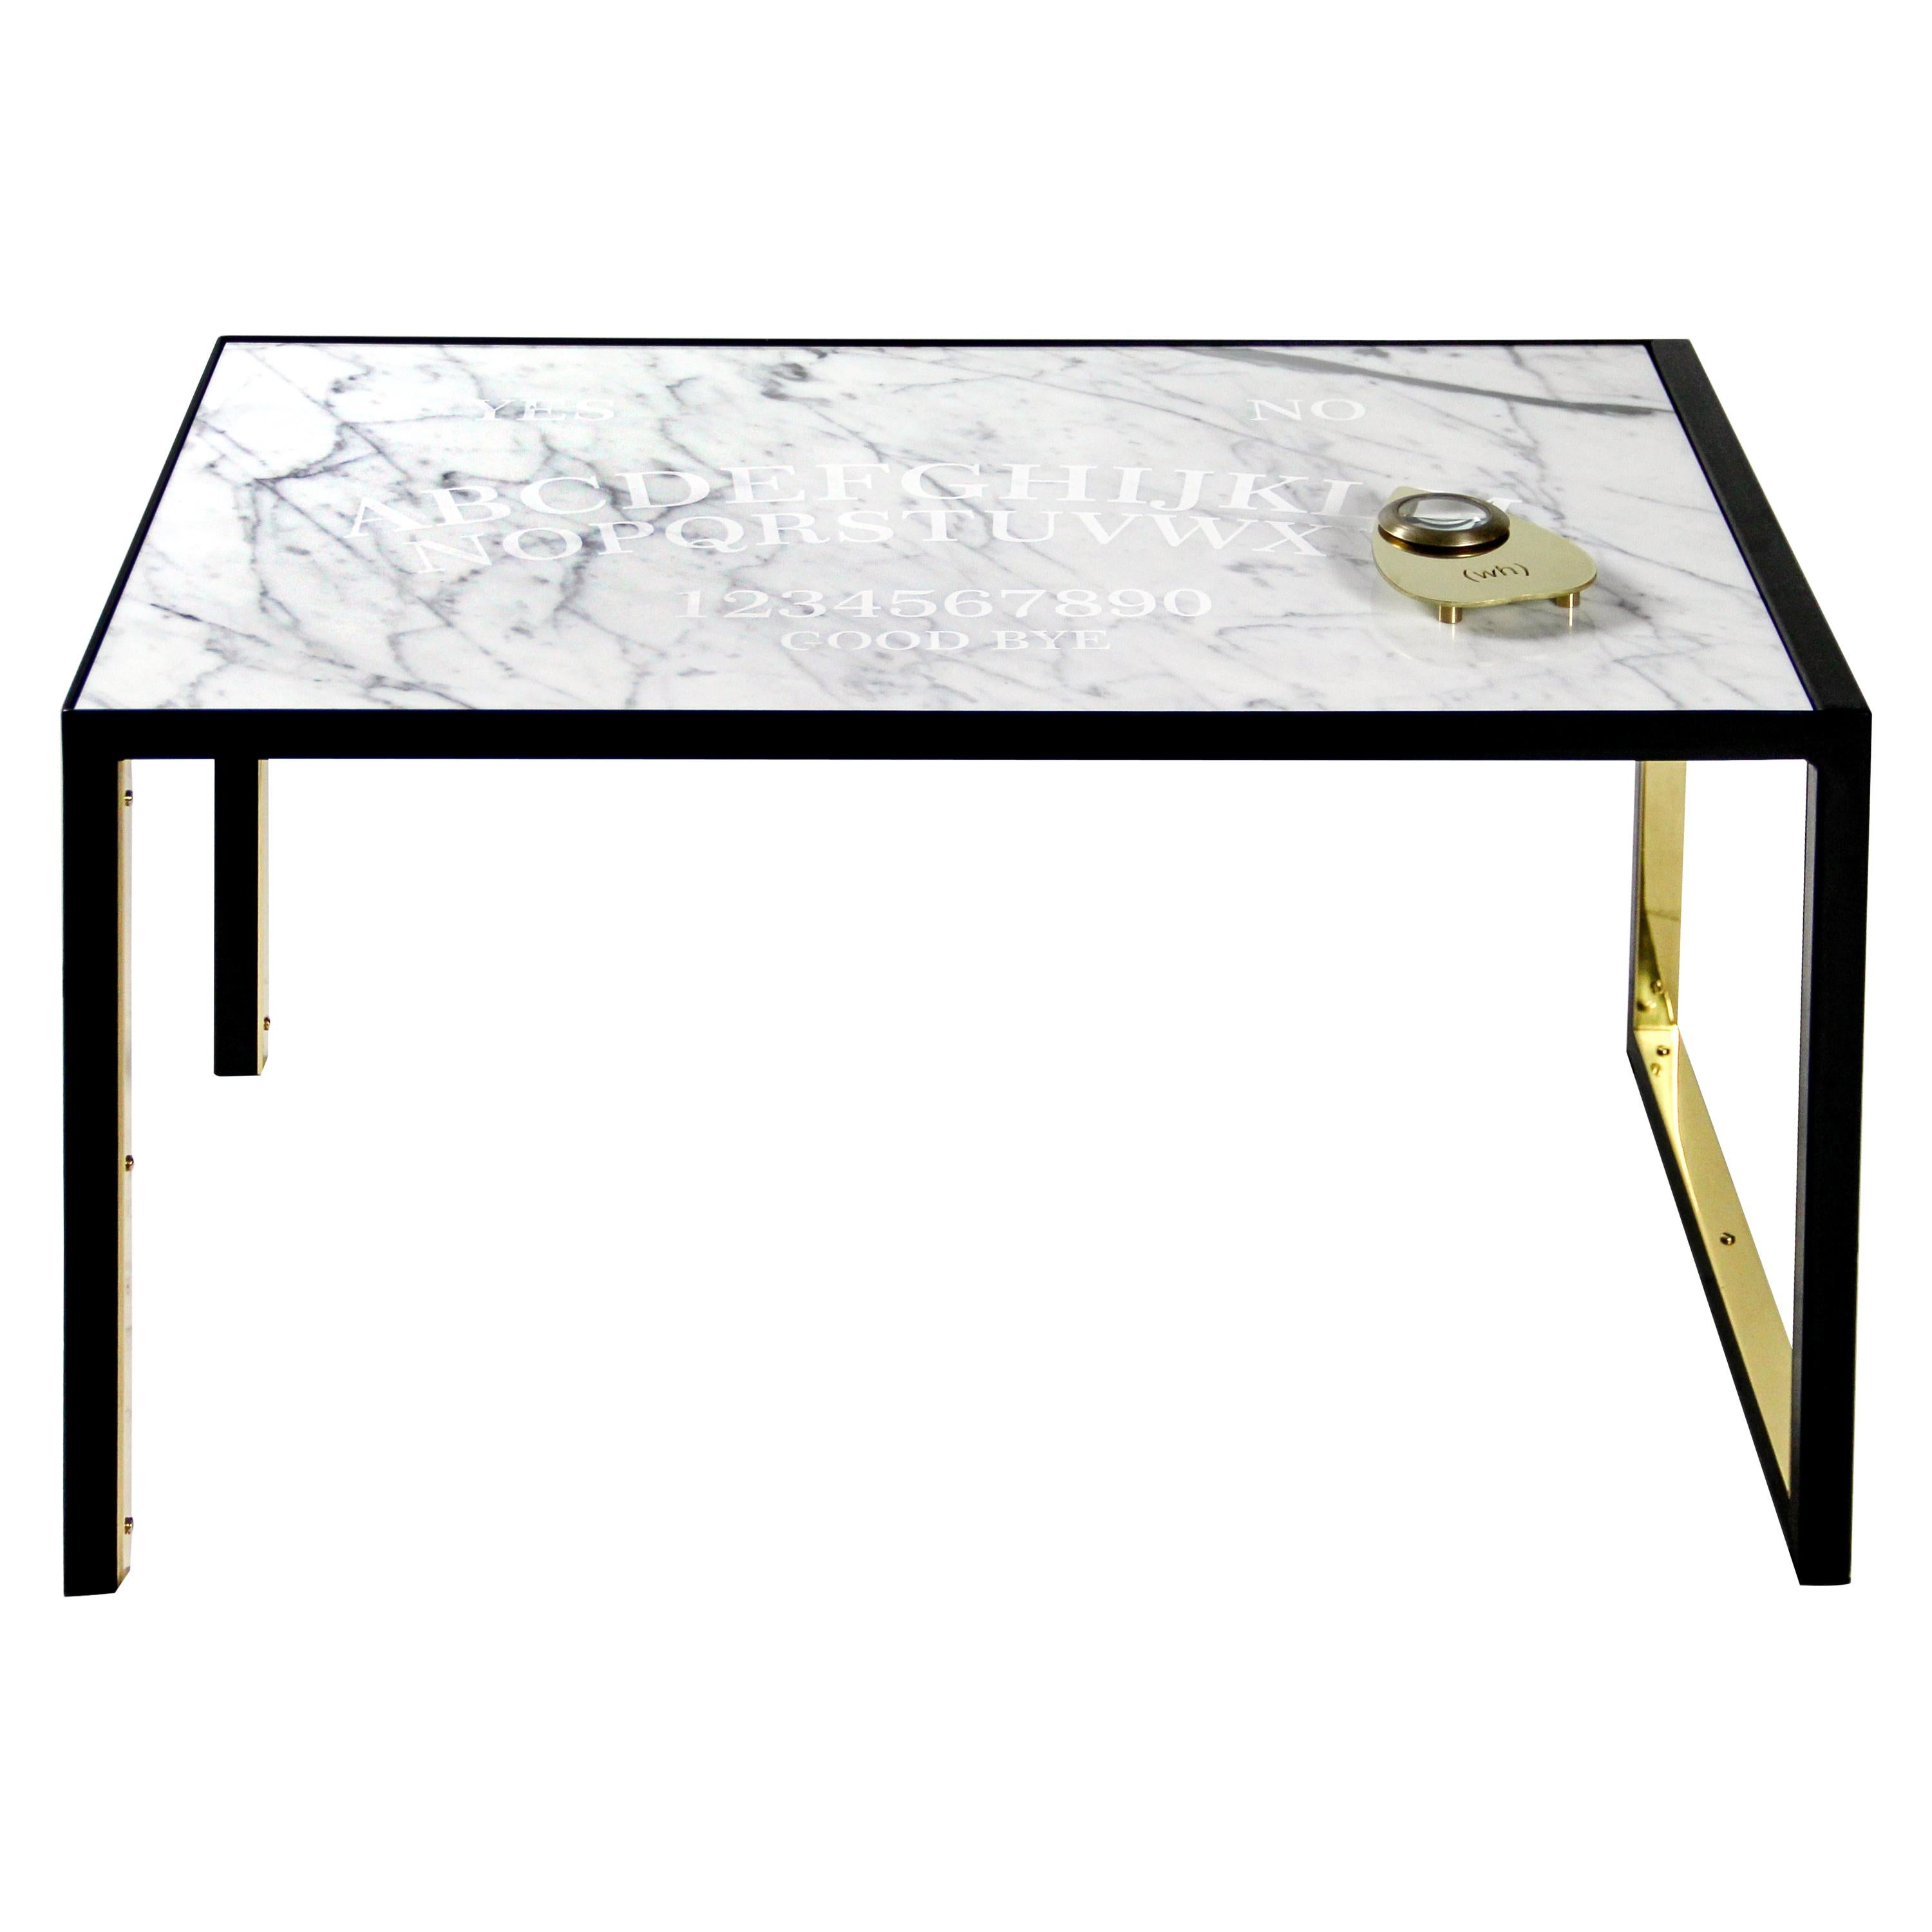 Ouija Board Table in Steel, Etched Carrara Marble and Brass Accents & Planchette